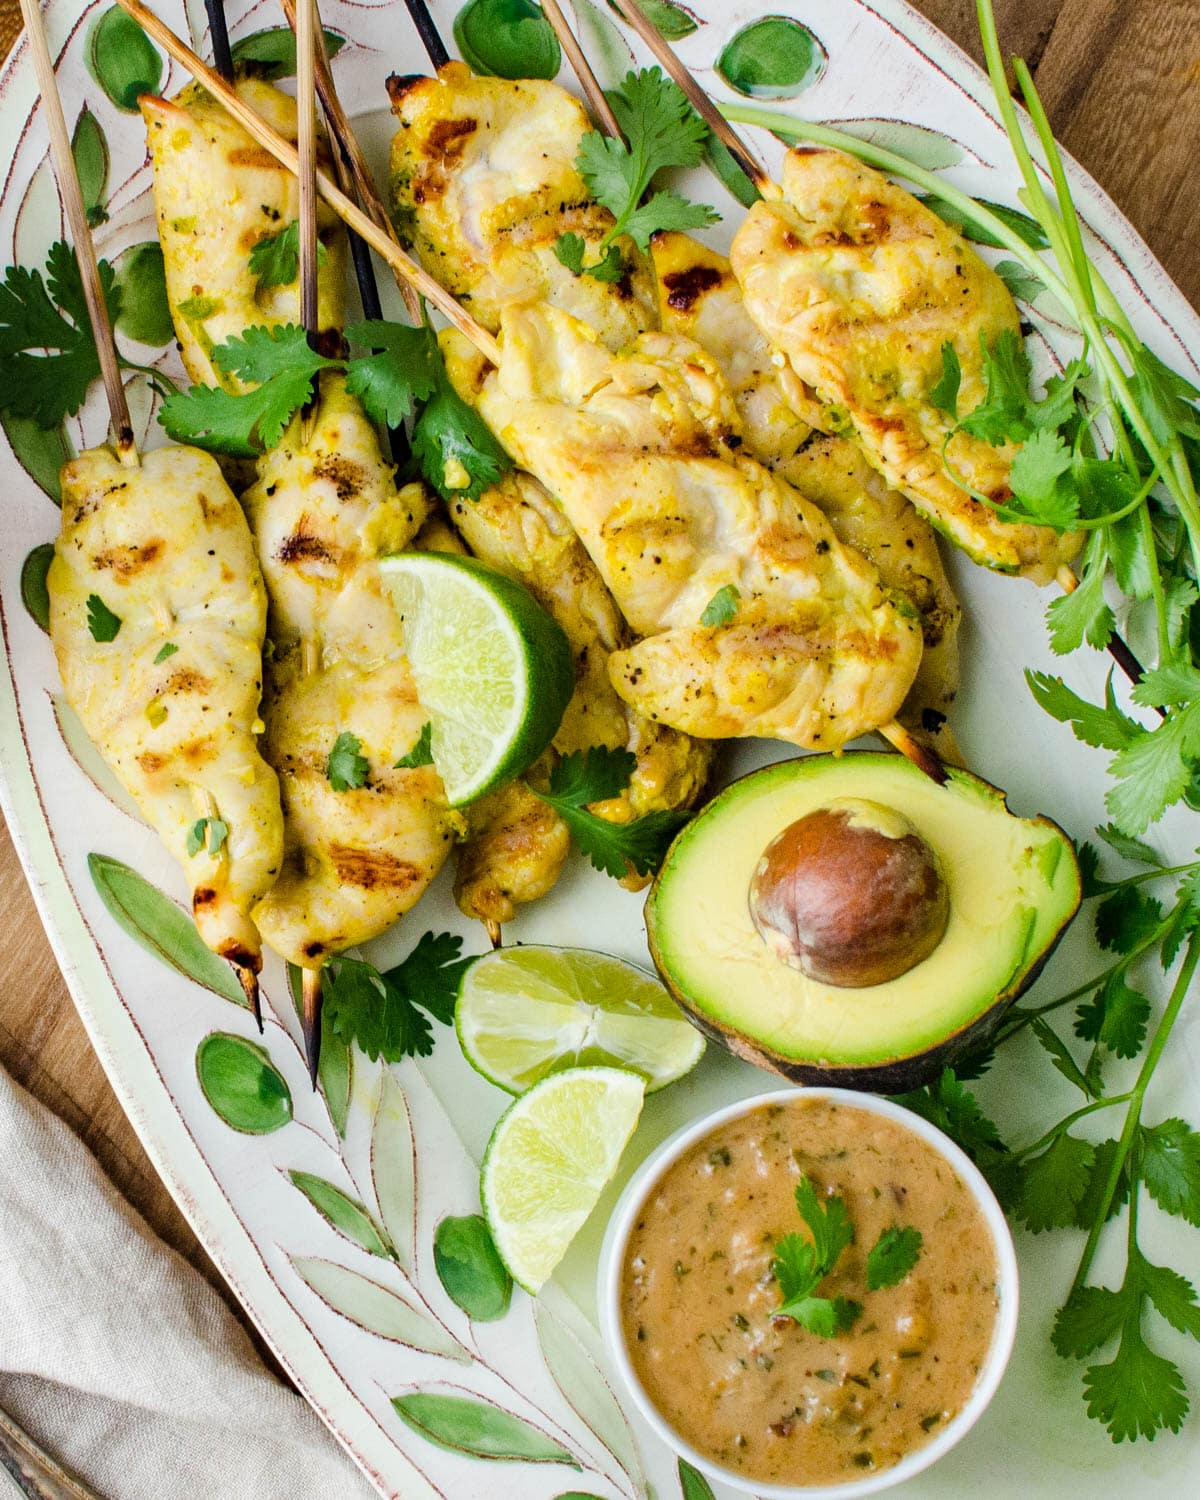 Serving the cooked chicken skewers on a platter with peanut sauce, extra cilantro, lime and avocado.